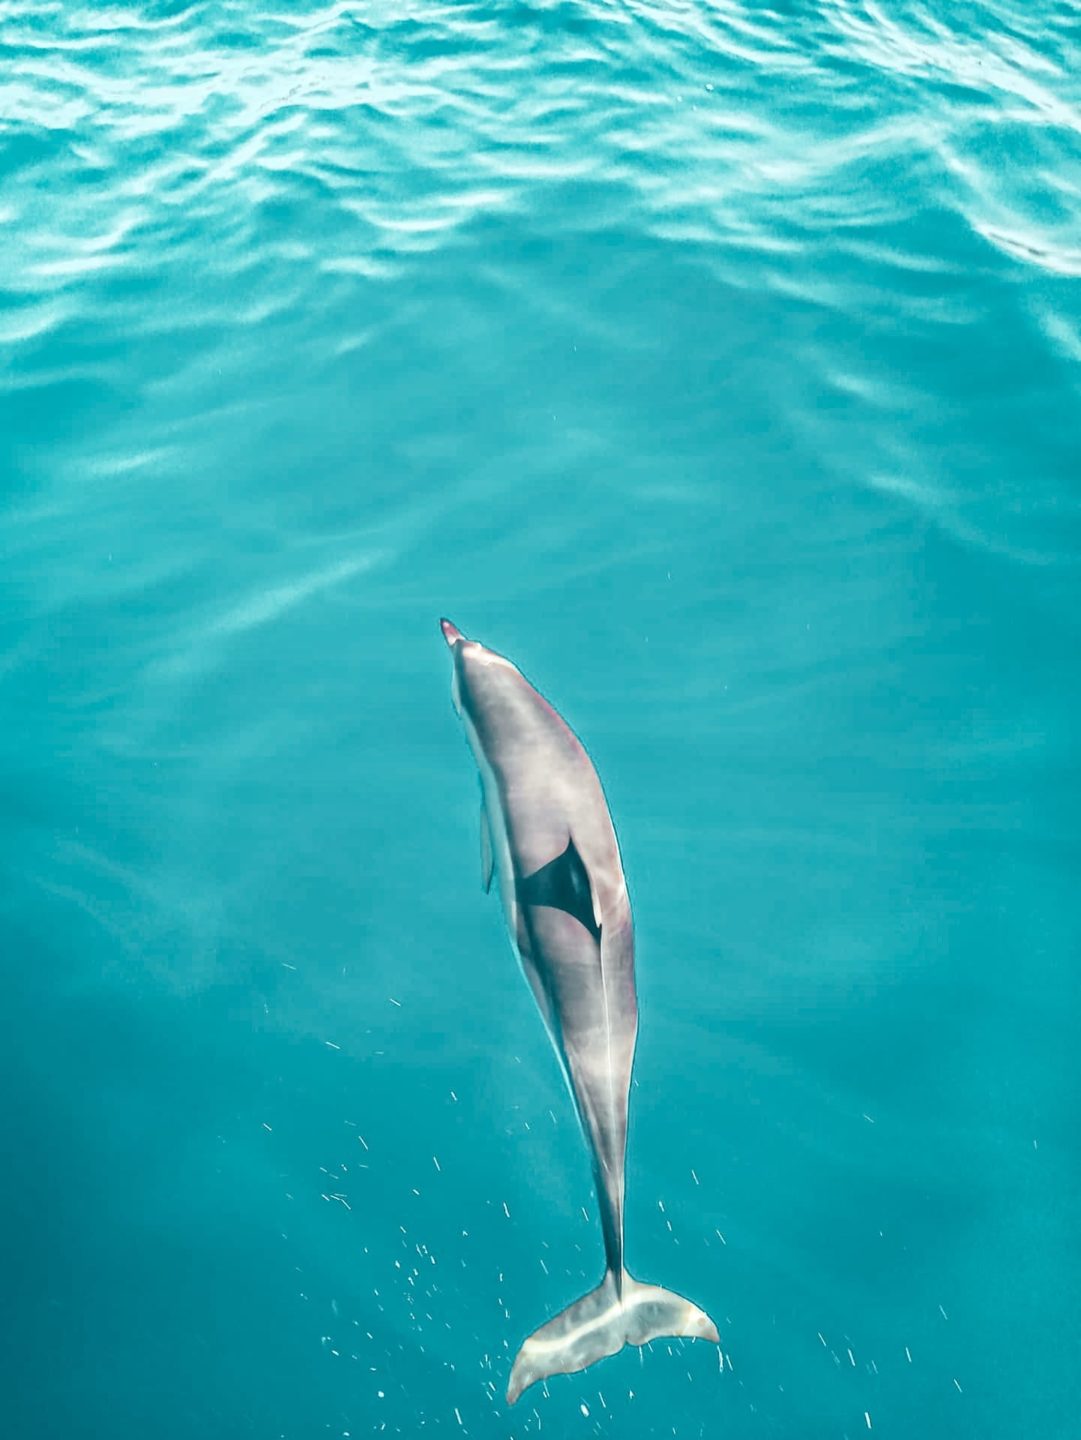 Dolphins in Algarve. Where to go to see dolphins.